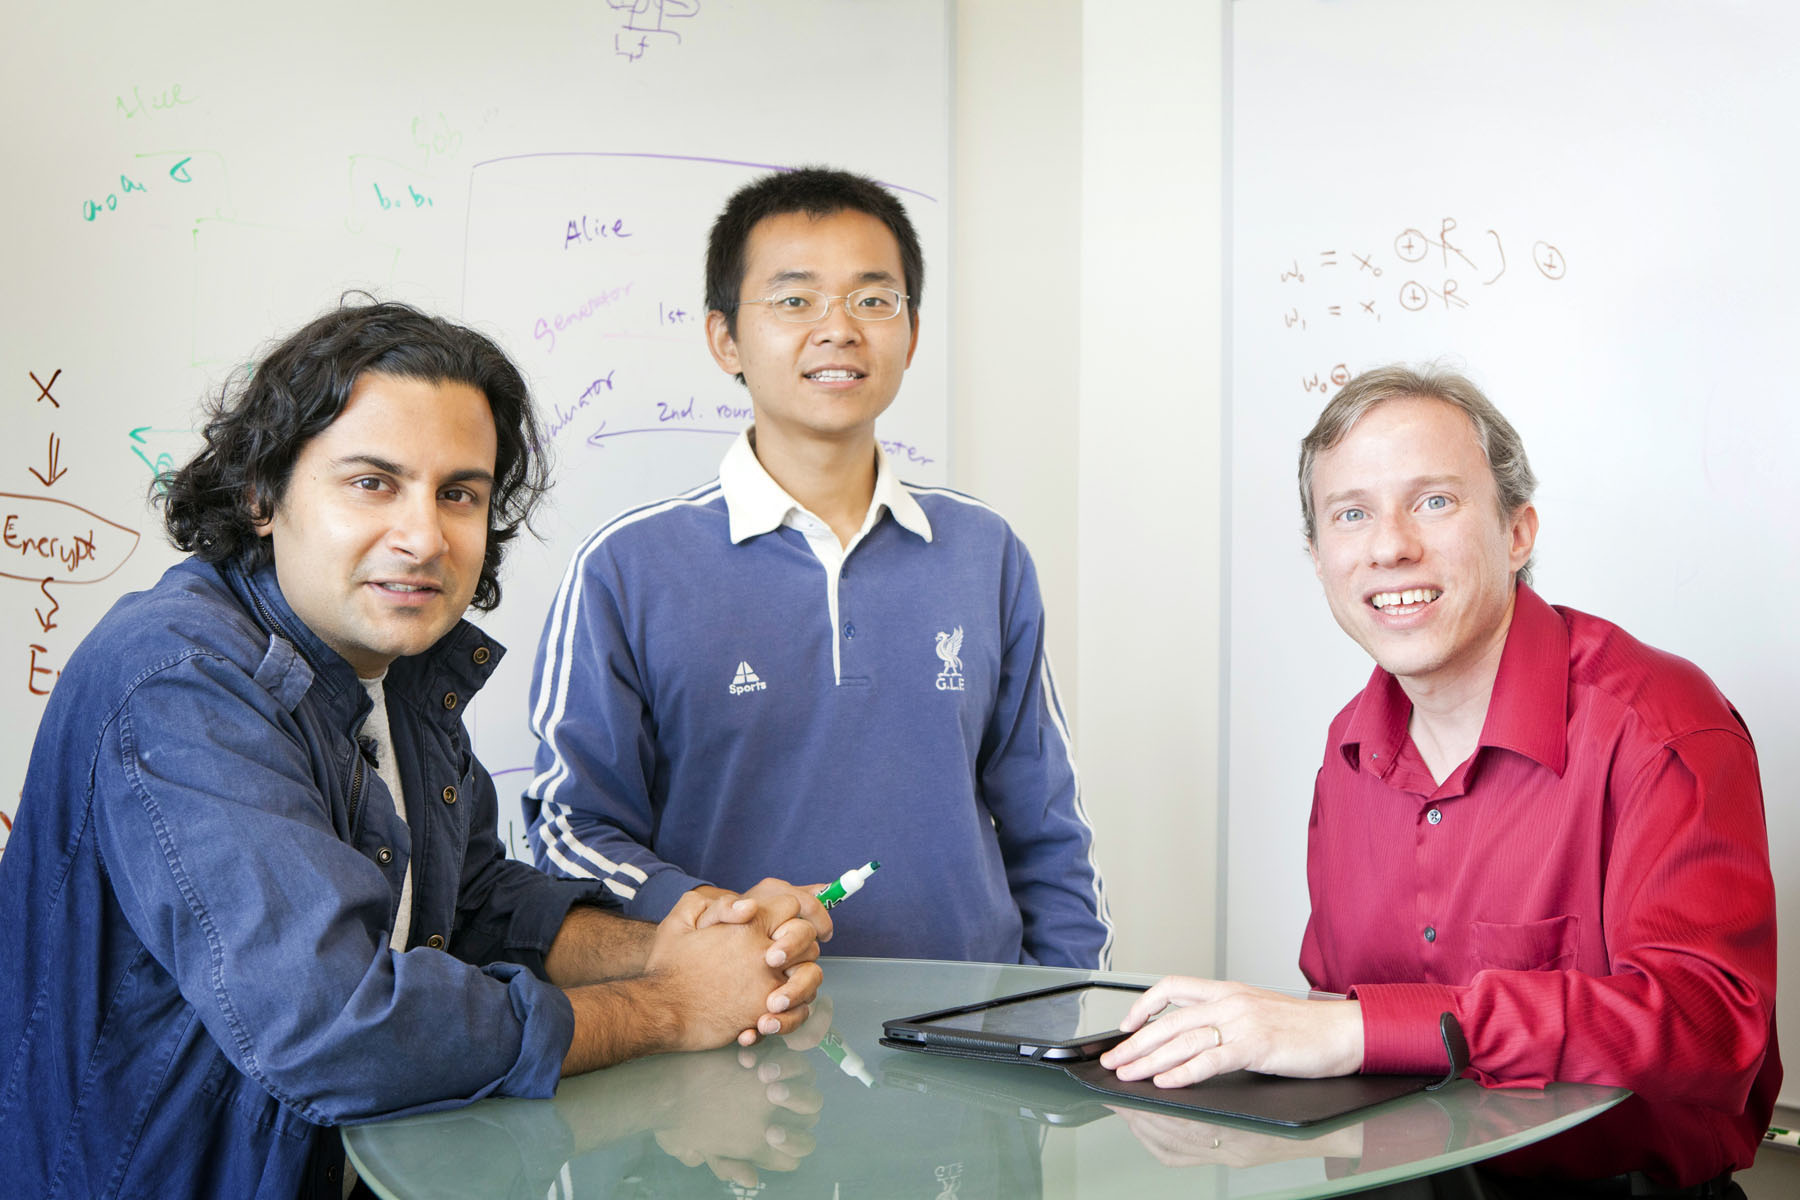 Three people working together. Left to right: abhi shelat, Yan Huang, and David Evans